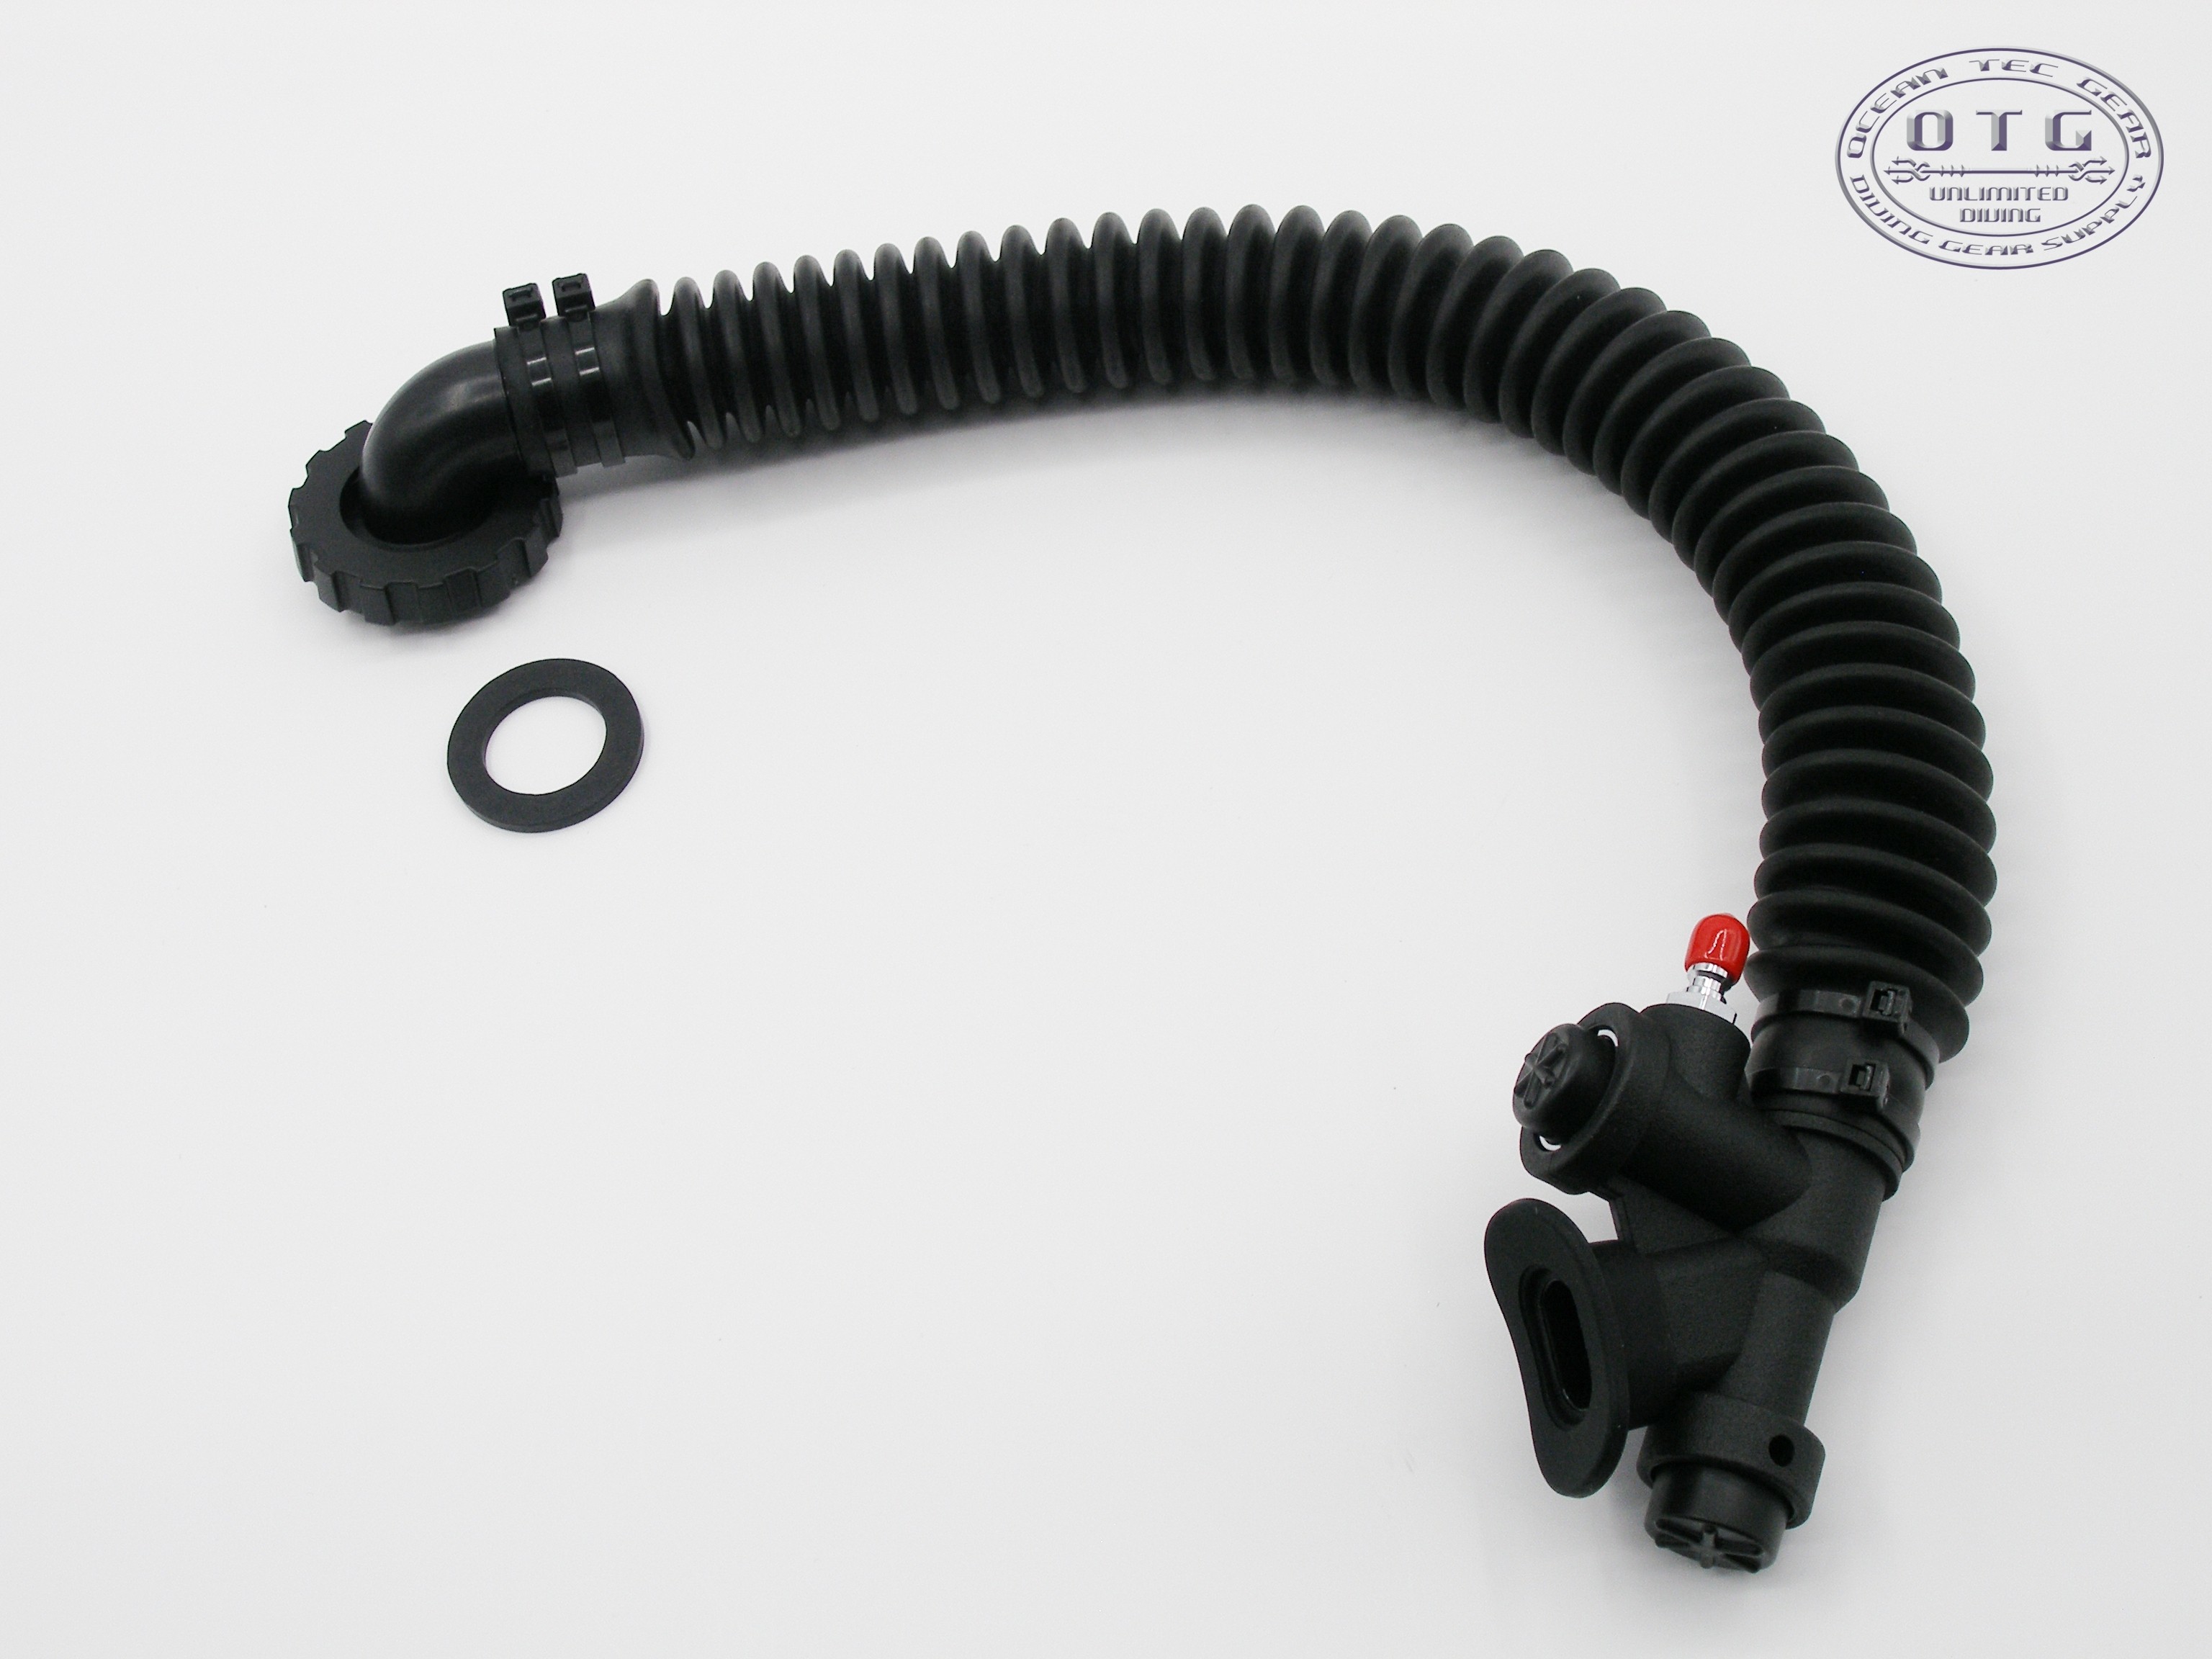 BCD Corrugated Inflator Hose Scuba Diving Dive 13" Replacement AA86-13 